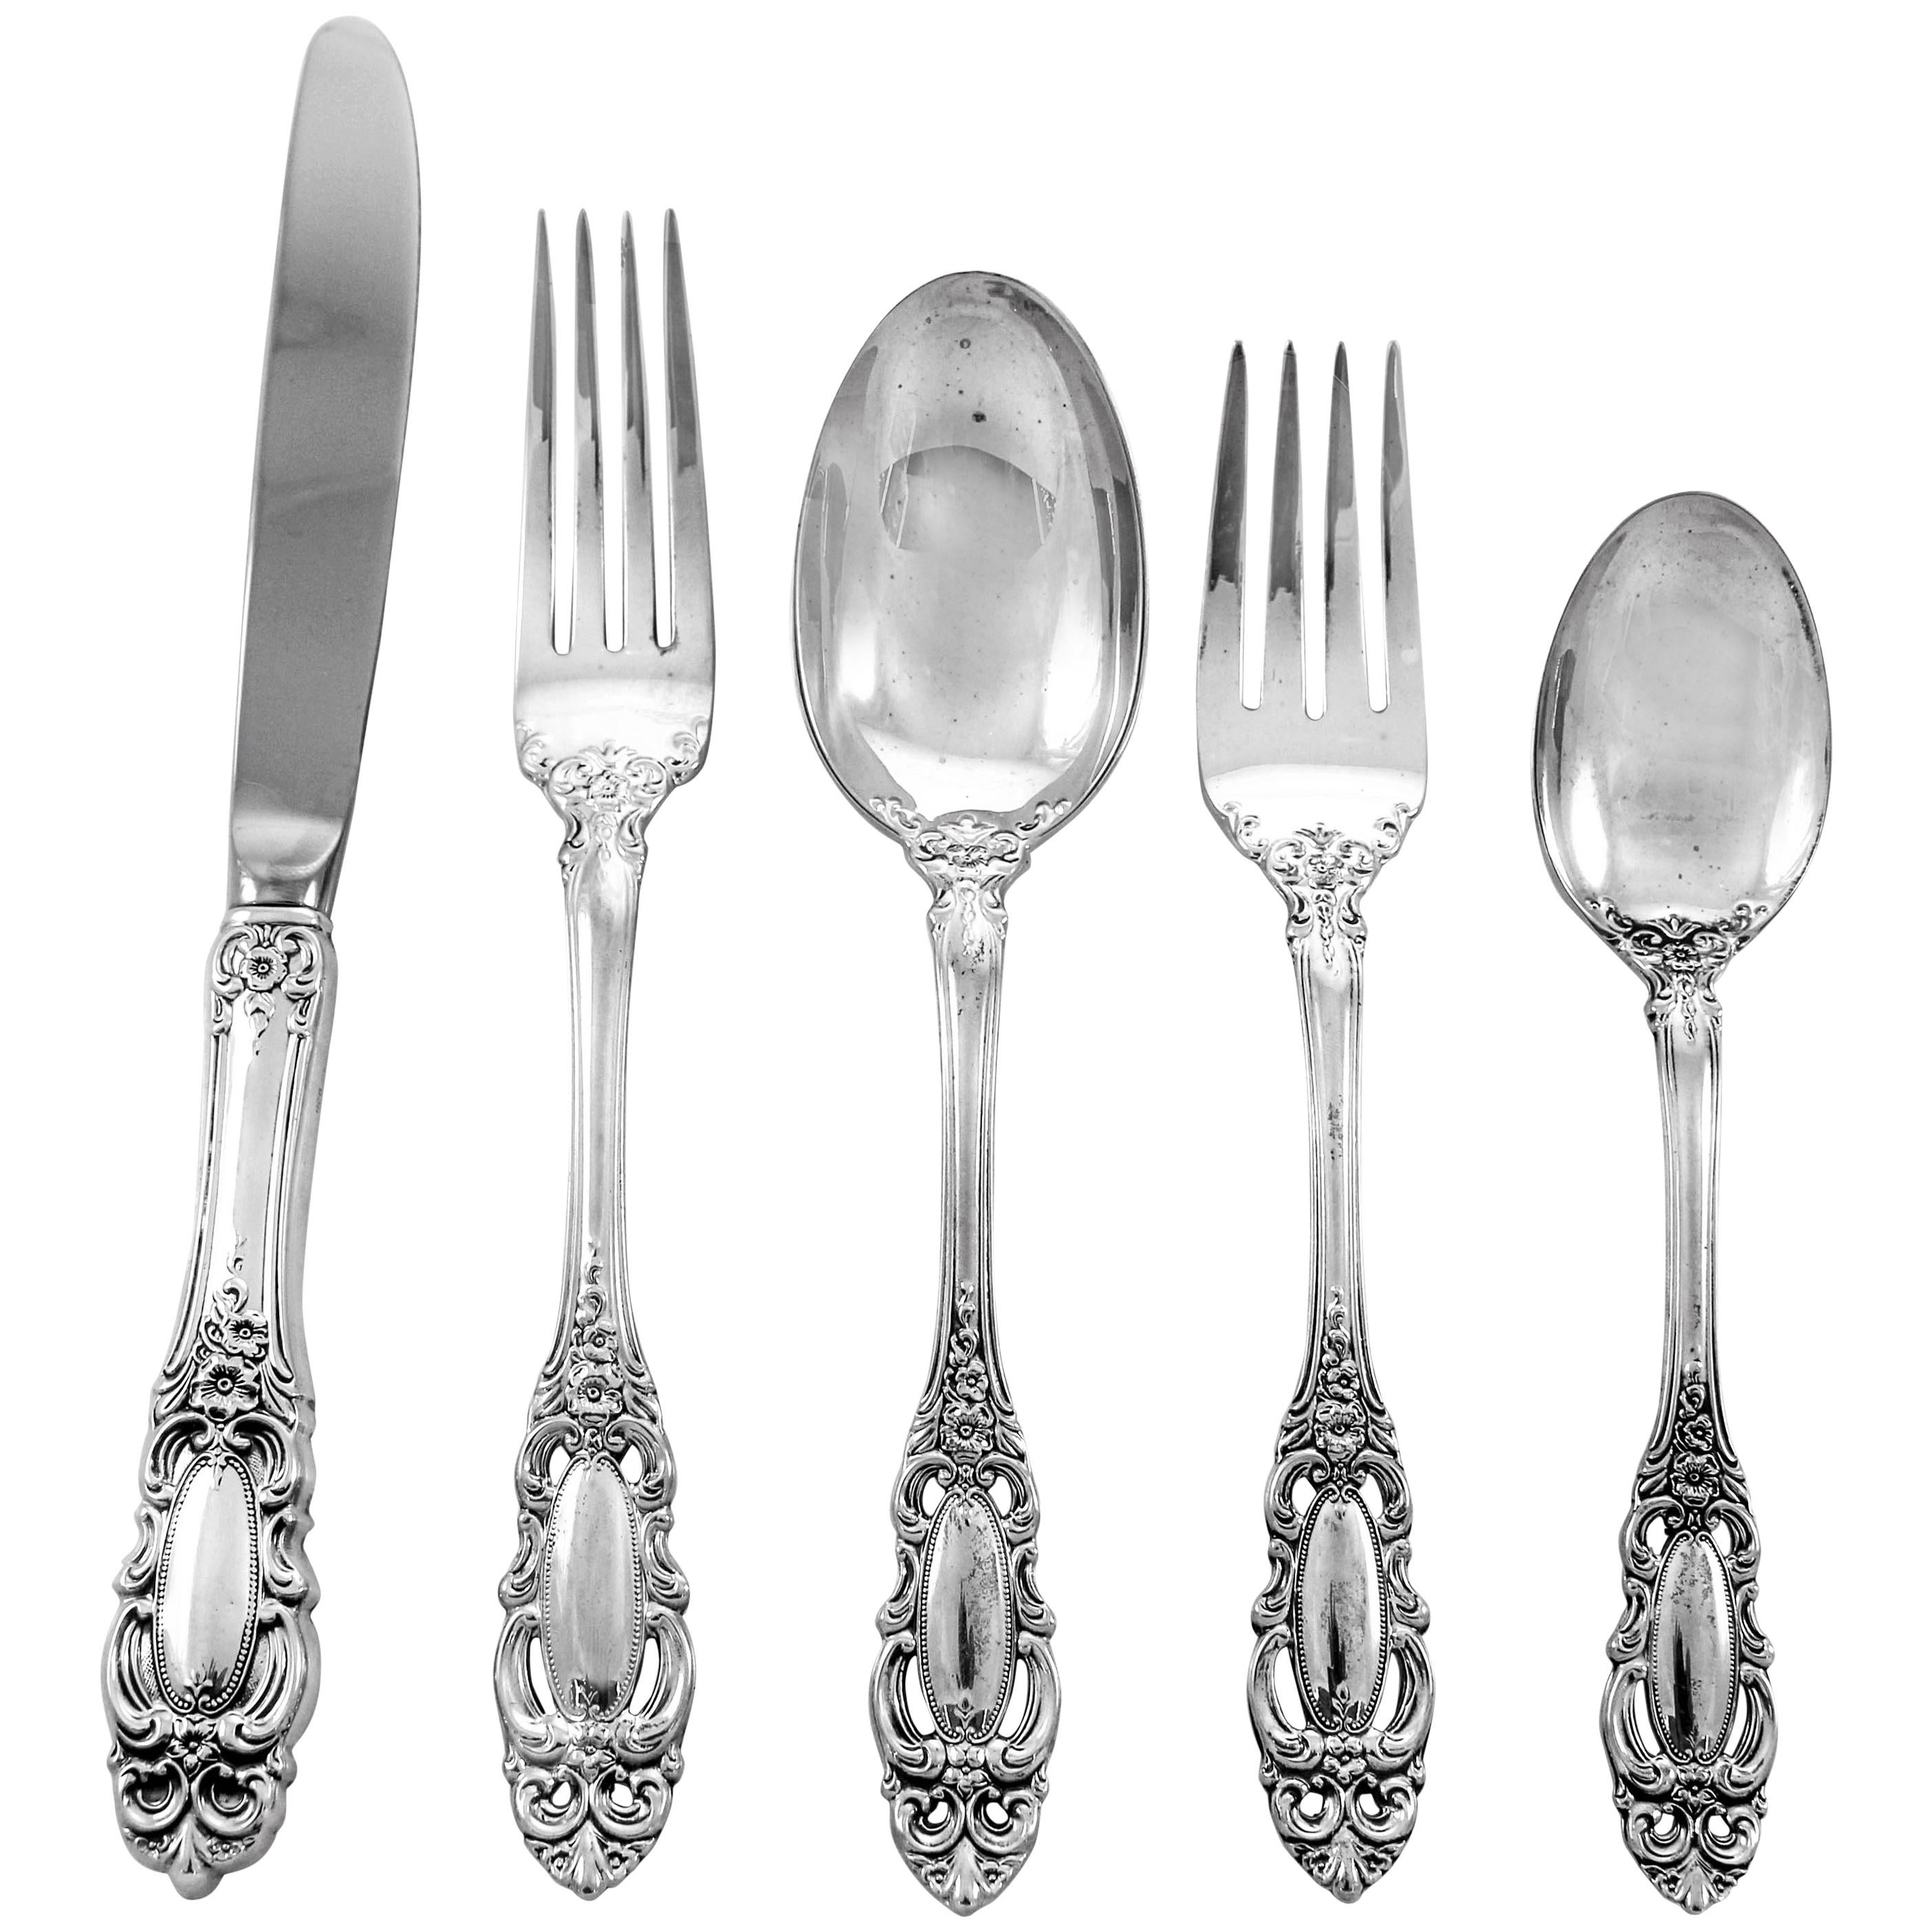 Grand Duchess Sterling Flatware; Service for 12 /60 Pieces